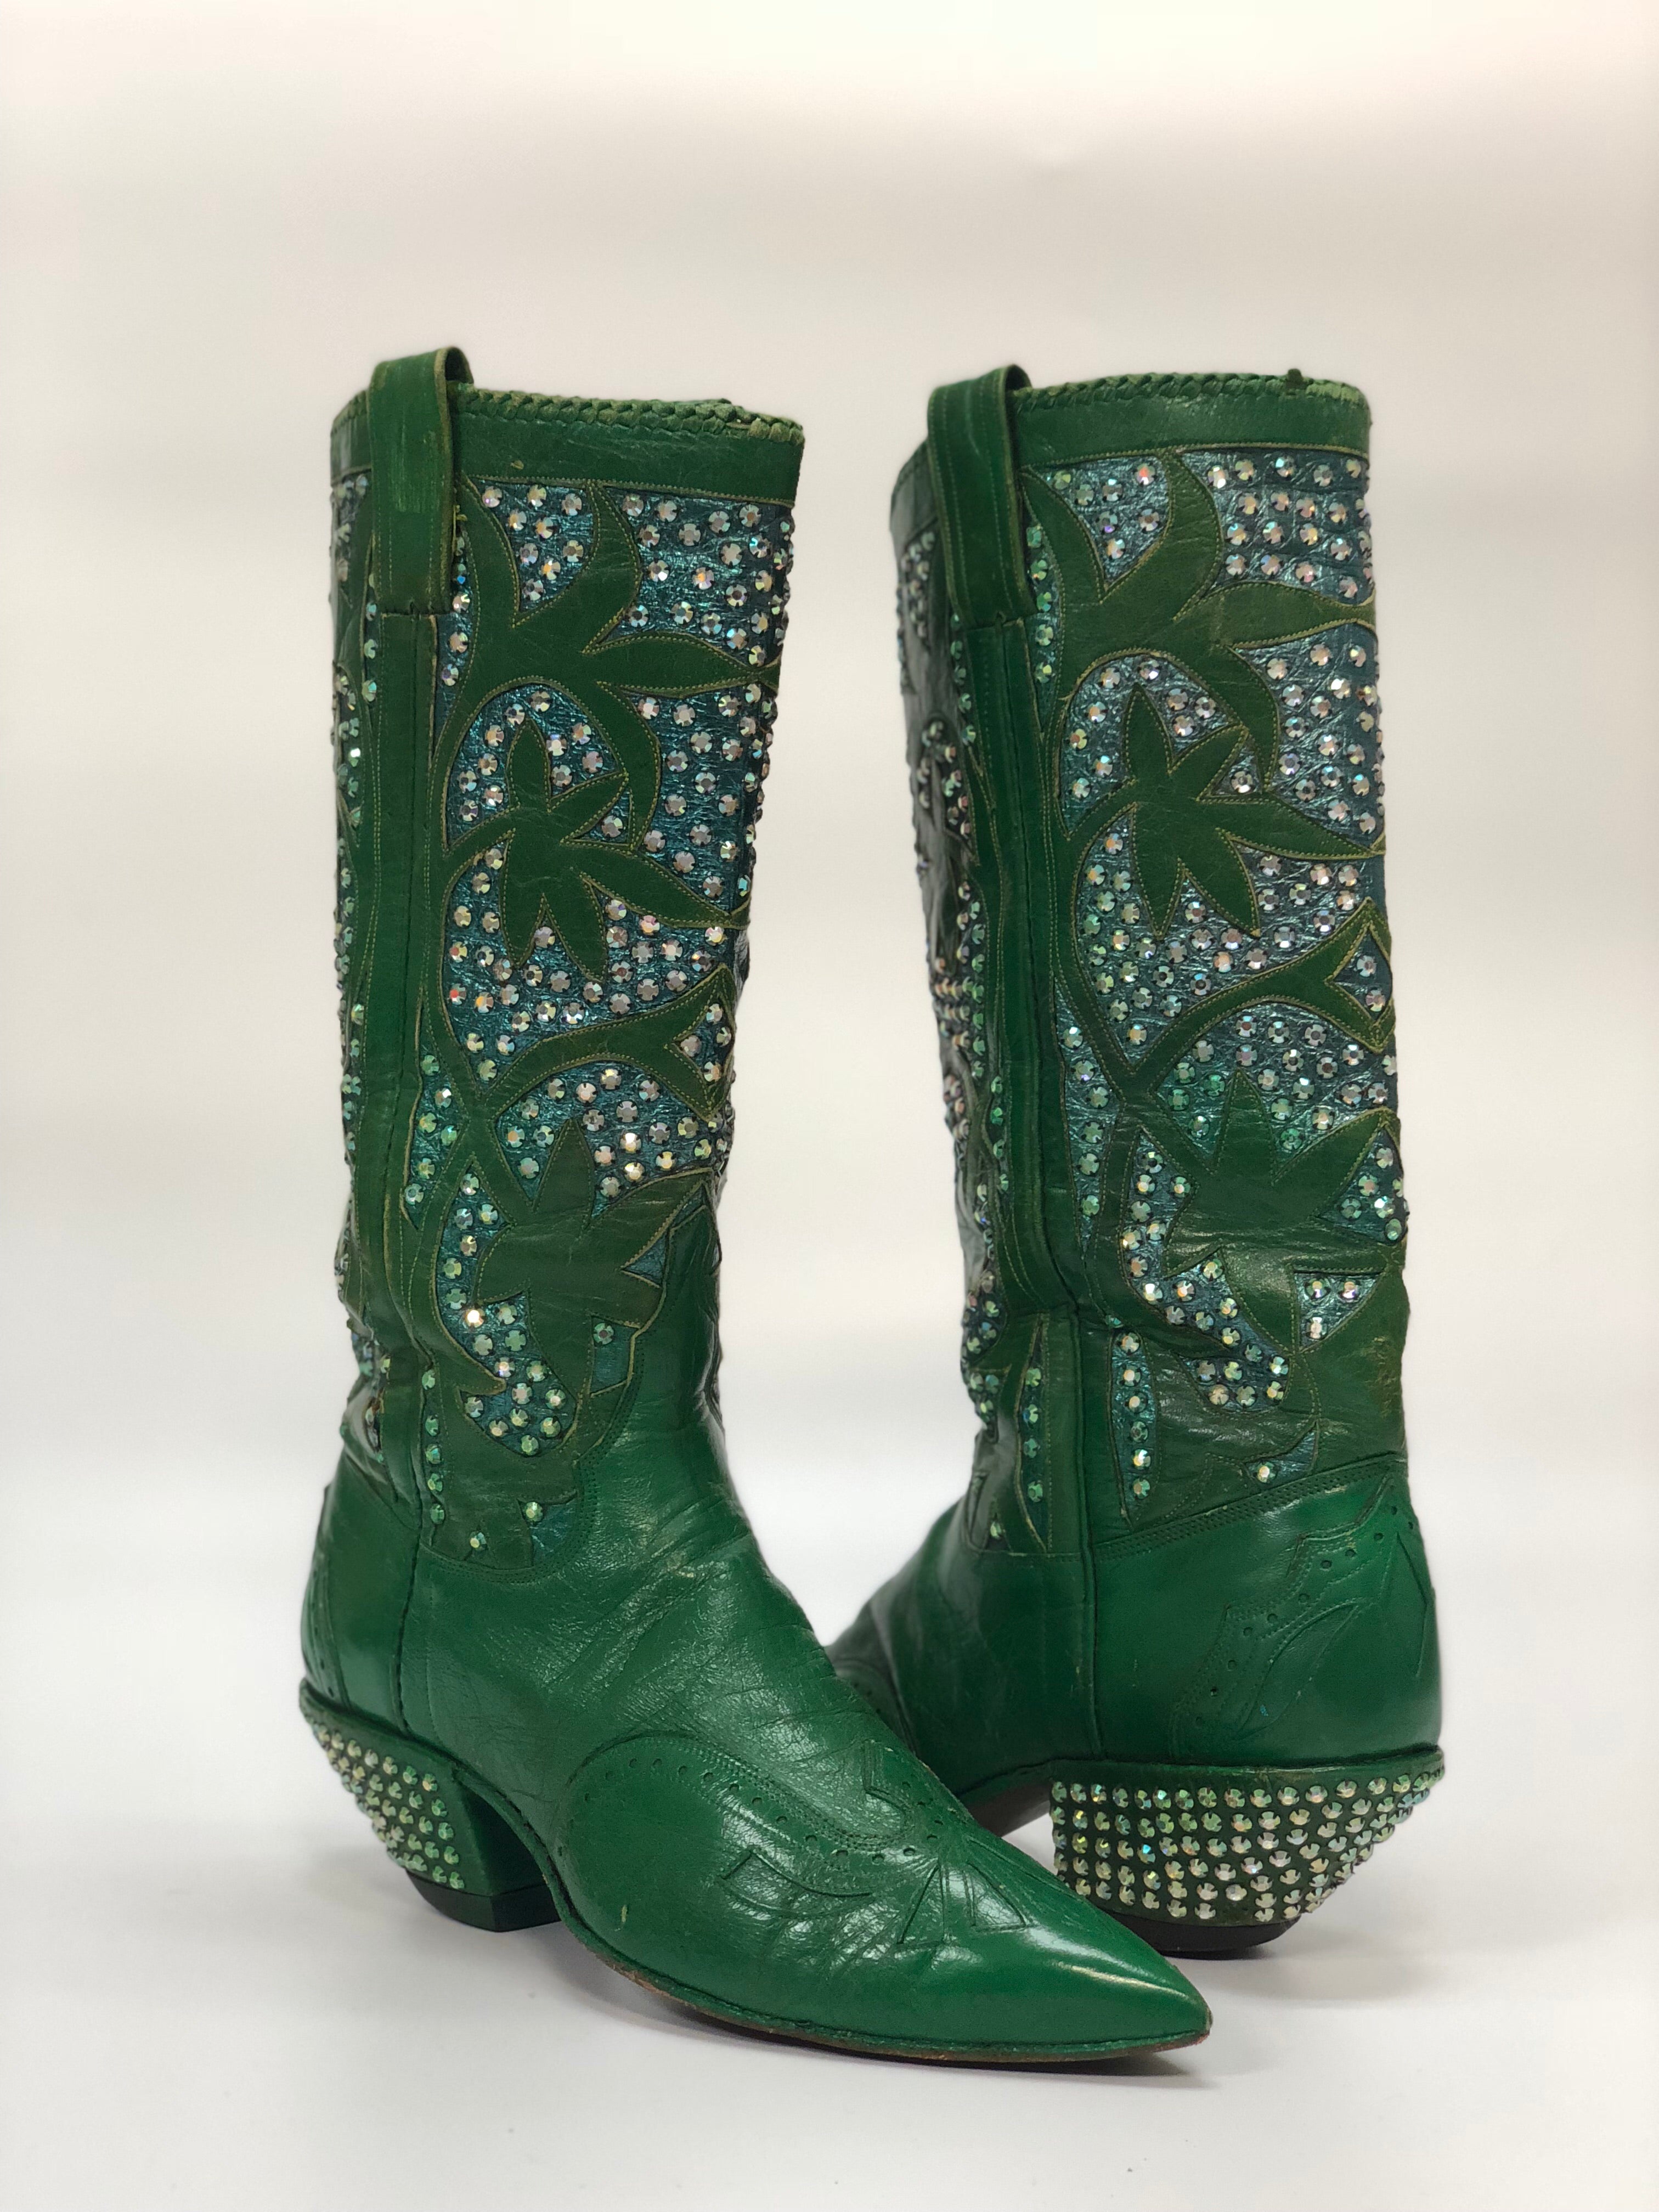 Green tweed, diamonds and cowboy boots - ALL-I-C